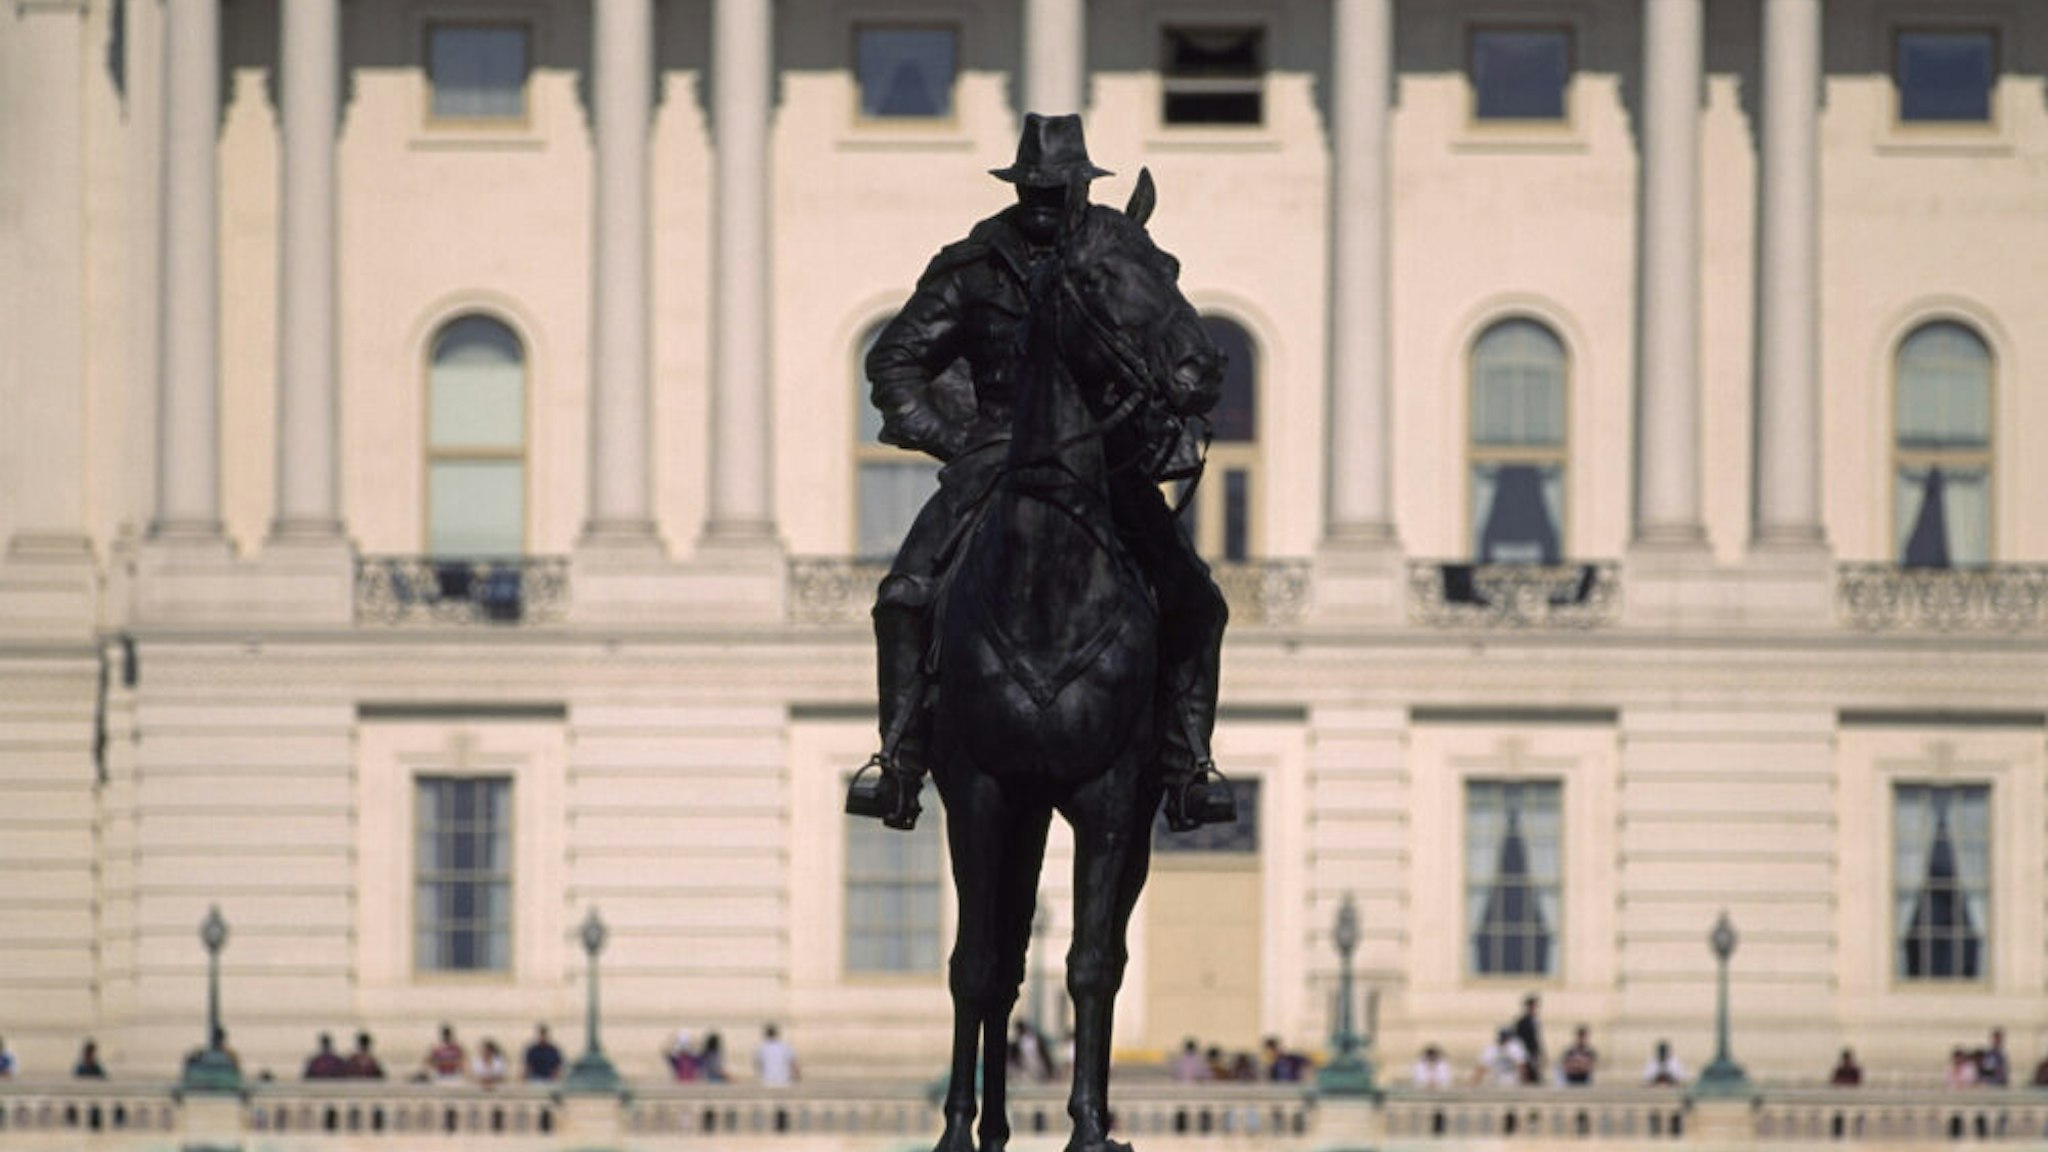 Ulysses S. Grant in front of U.S. Capitol